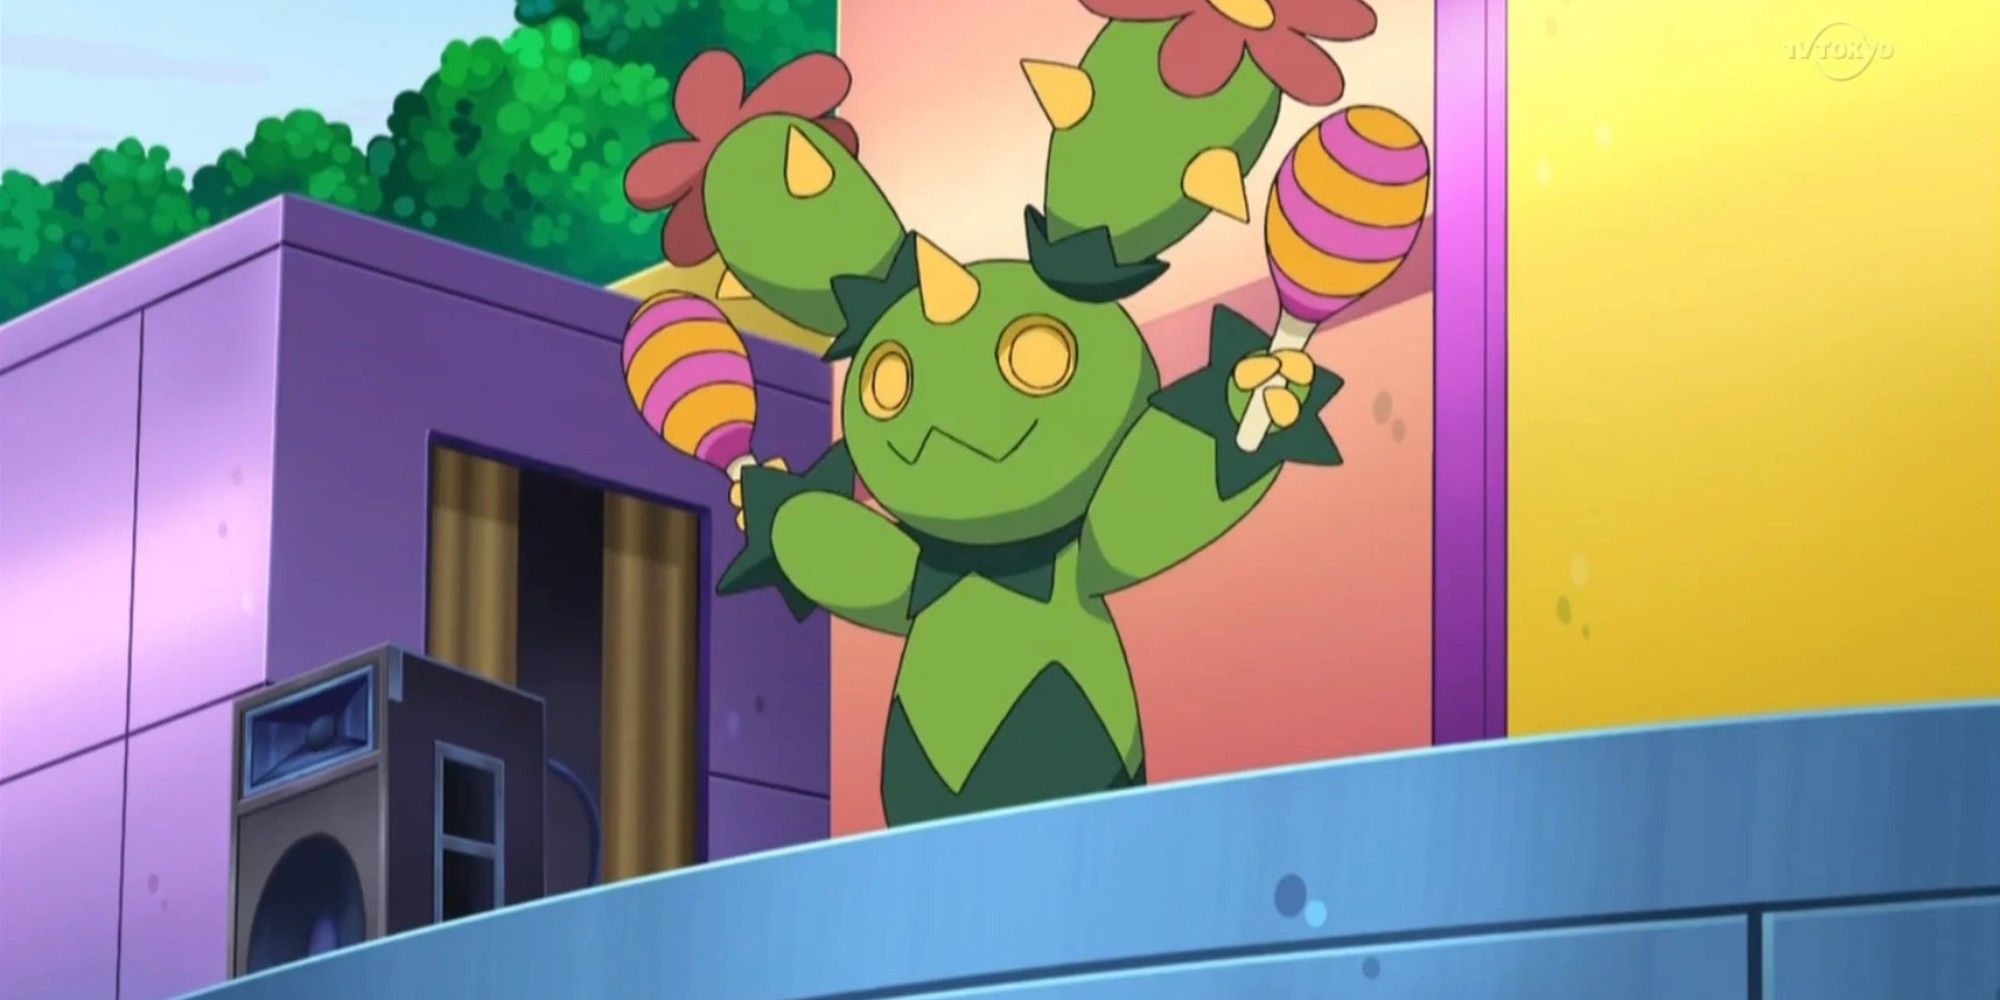 Maractus from the anime looking happy on a balcony